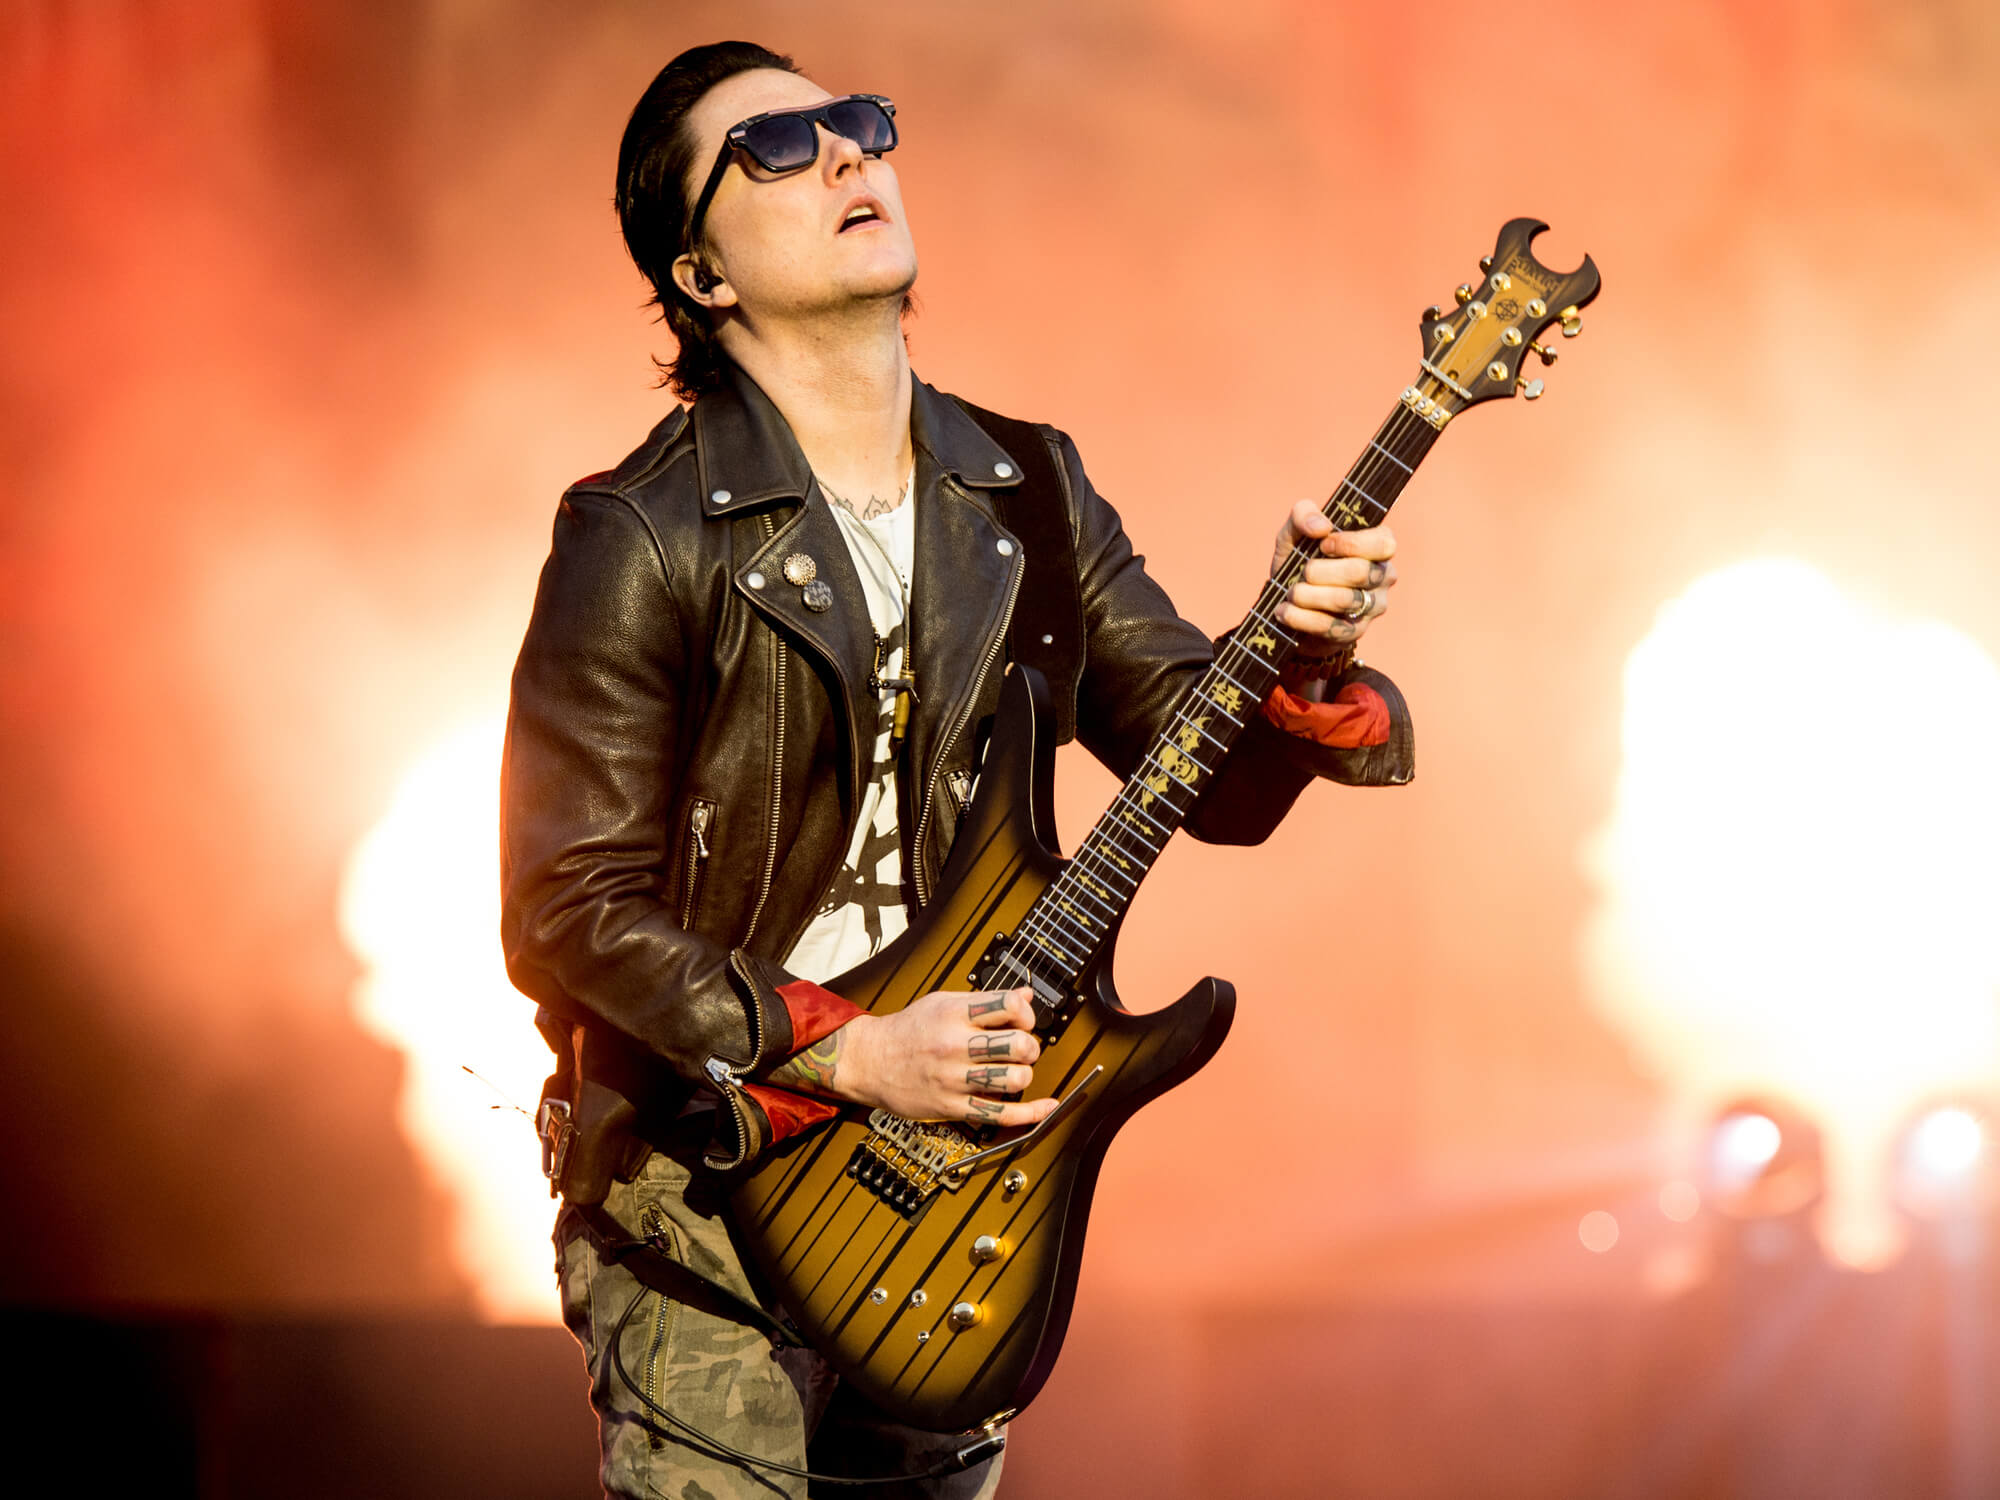 Synyster Gates of Avenged Sevenfold performs